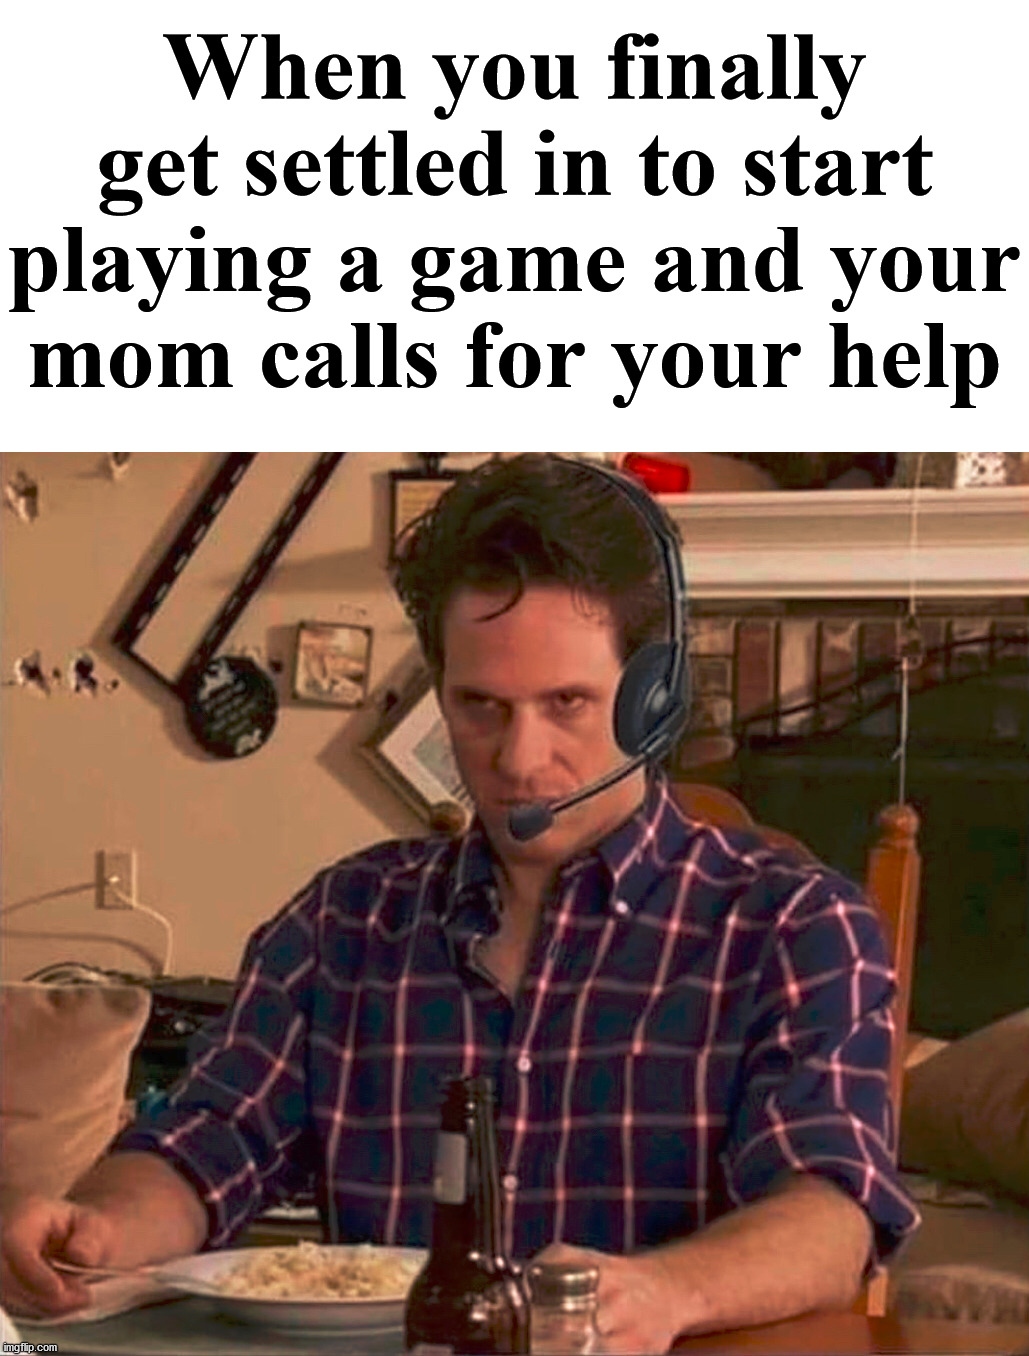 When you finally get settled in to start playing a game and your mom calls for your help | image tagged in gaming | made w/ Imgflip meme maker